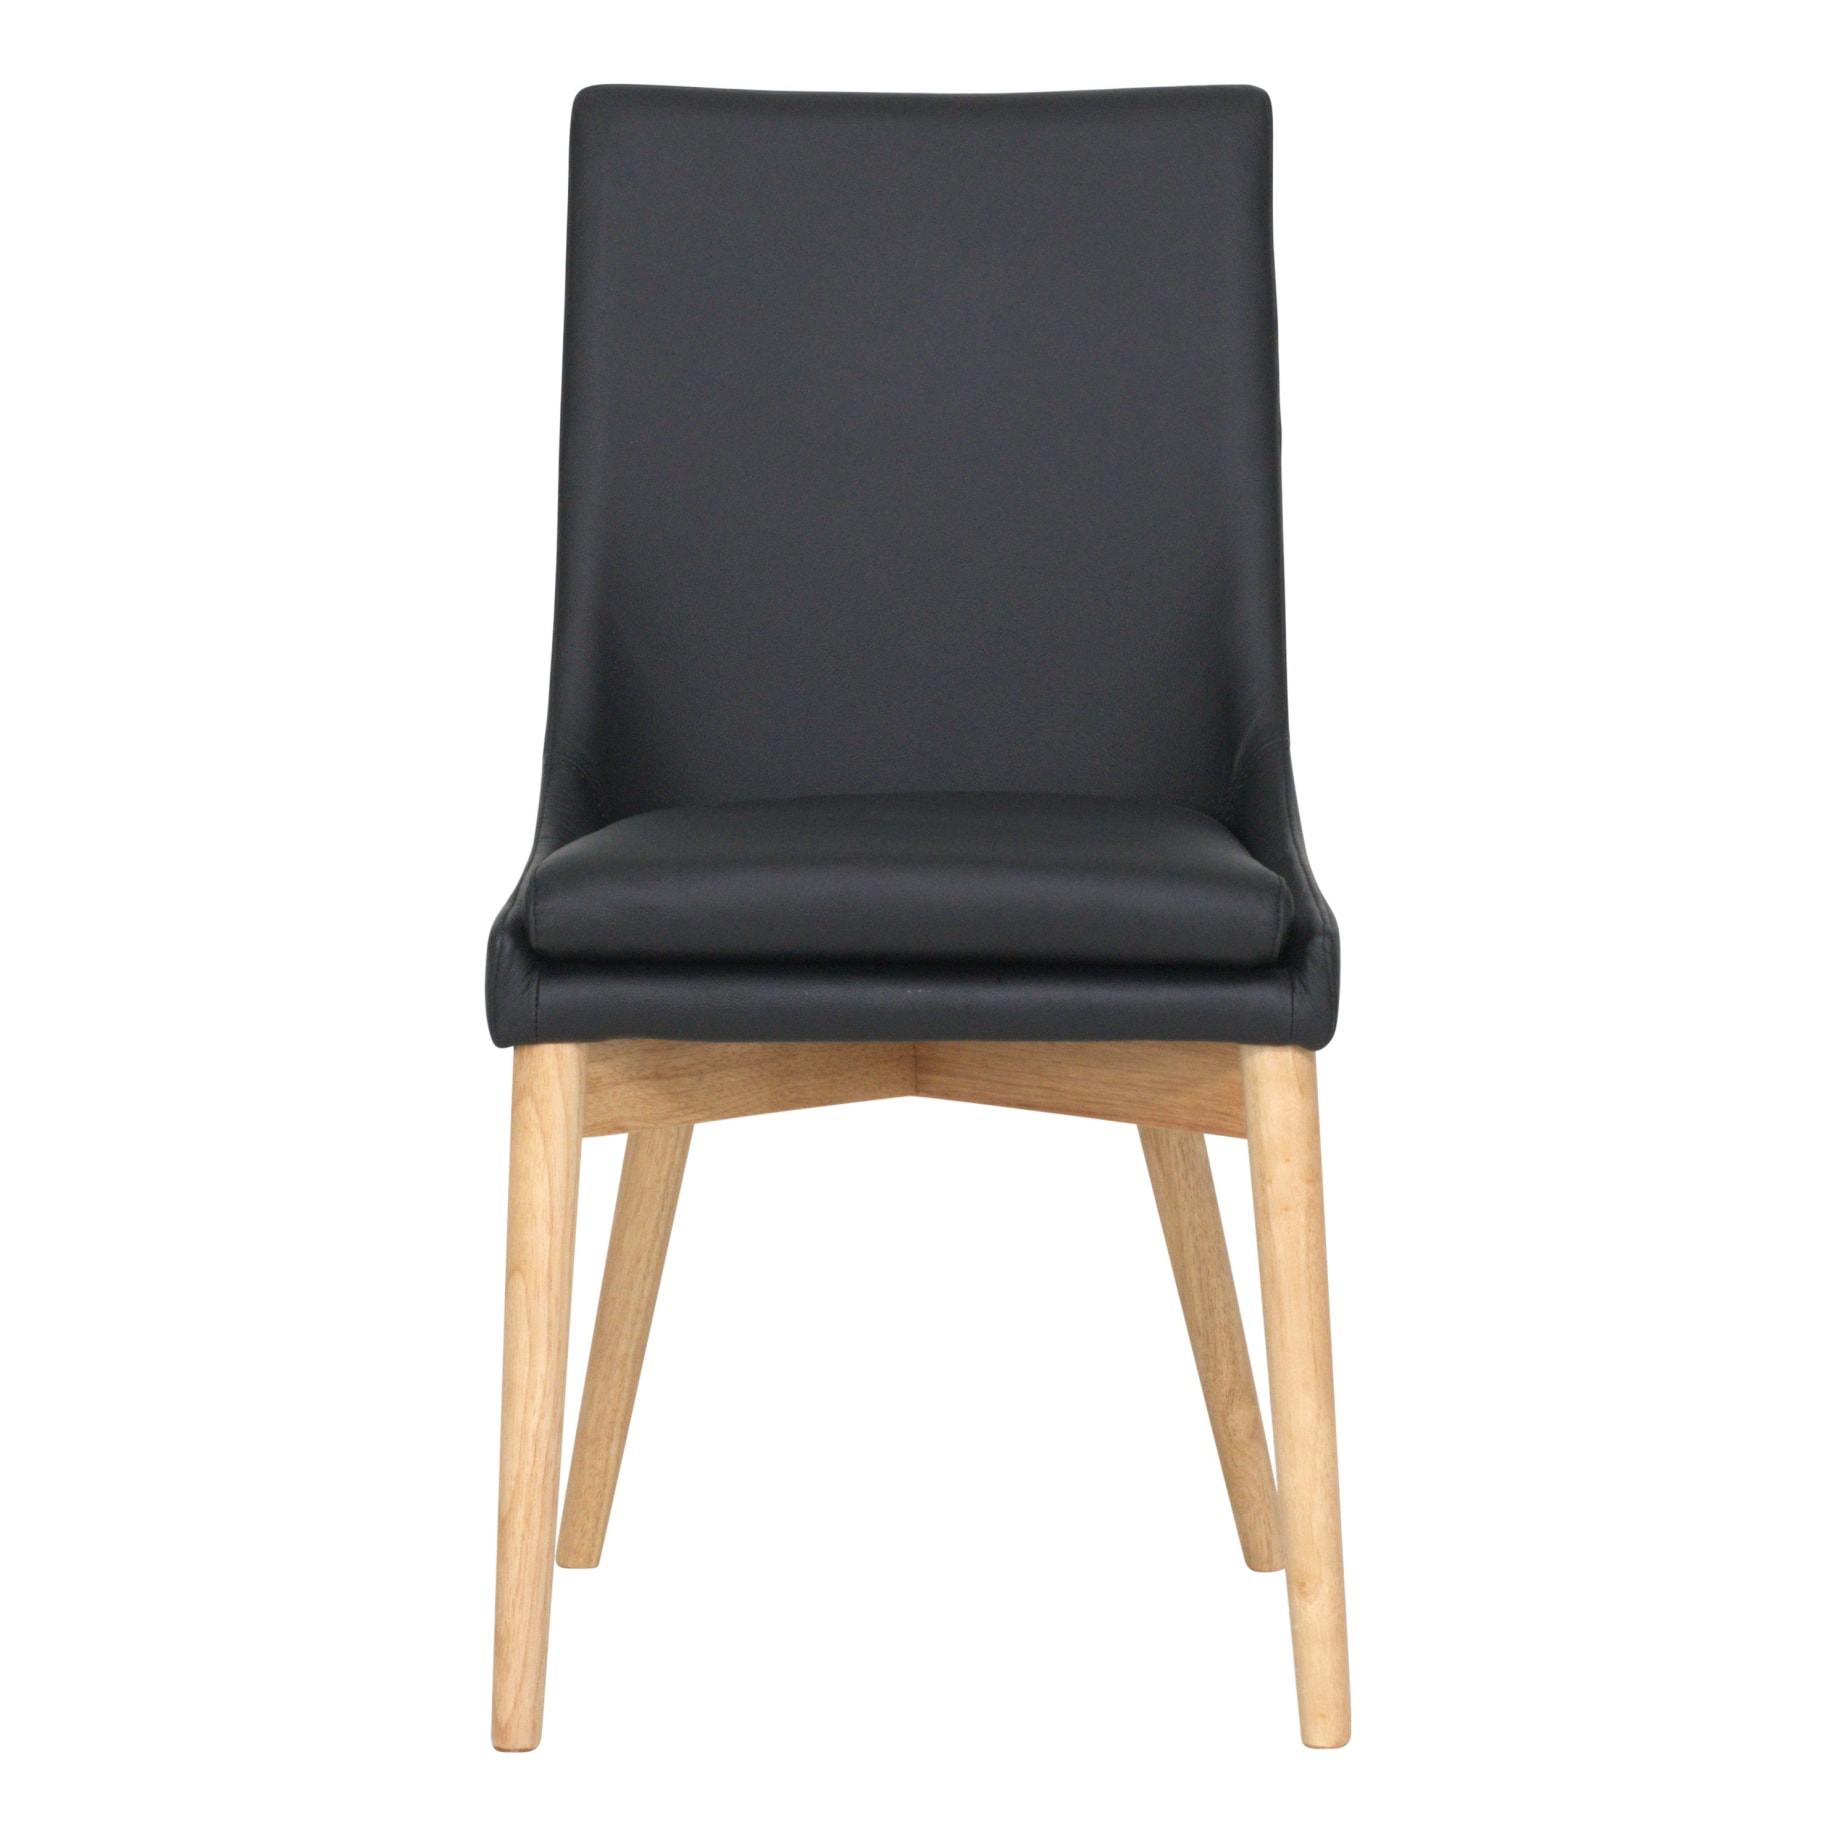 Highland Dining Chair in Black Leather / Oak Stain